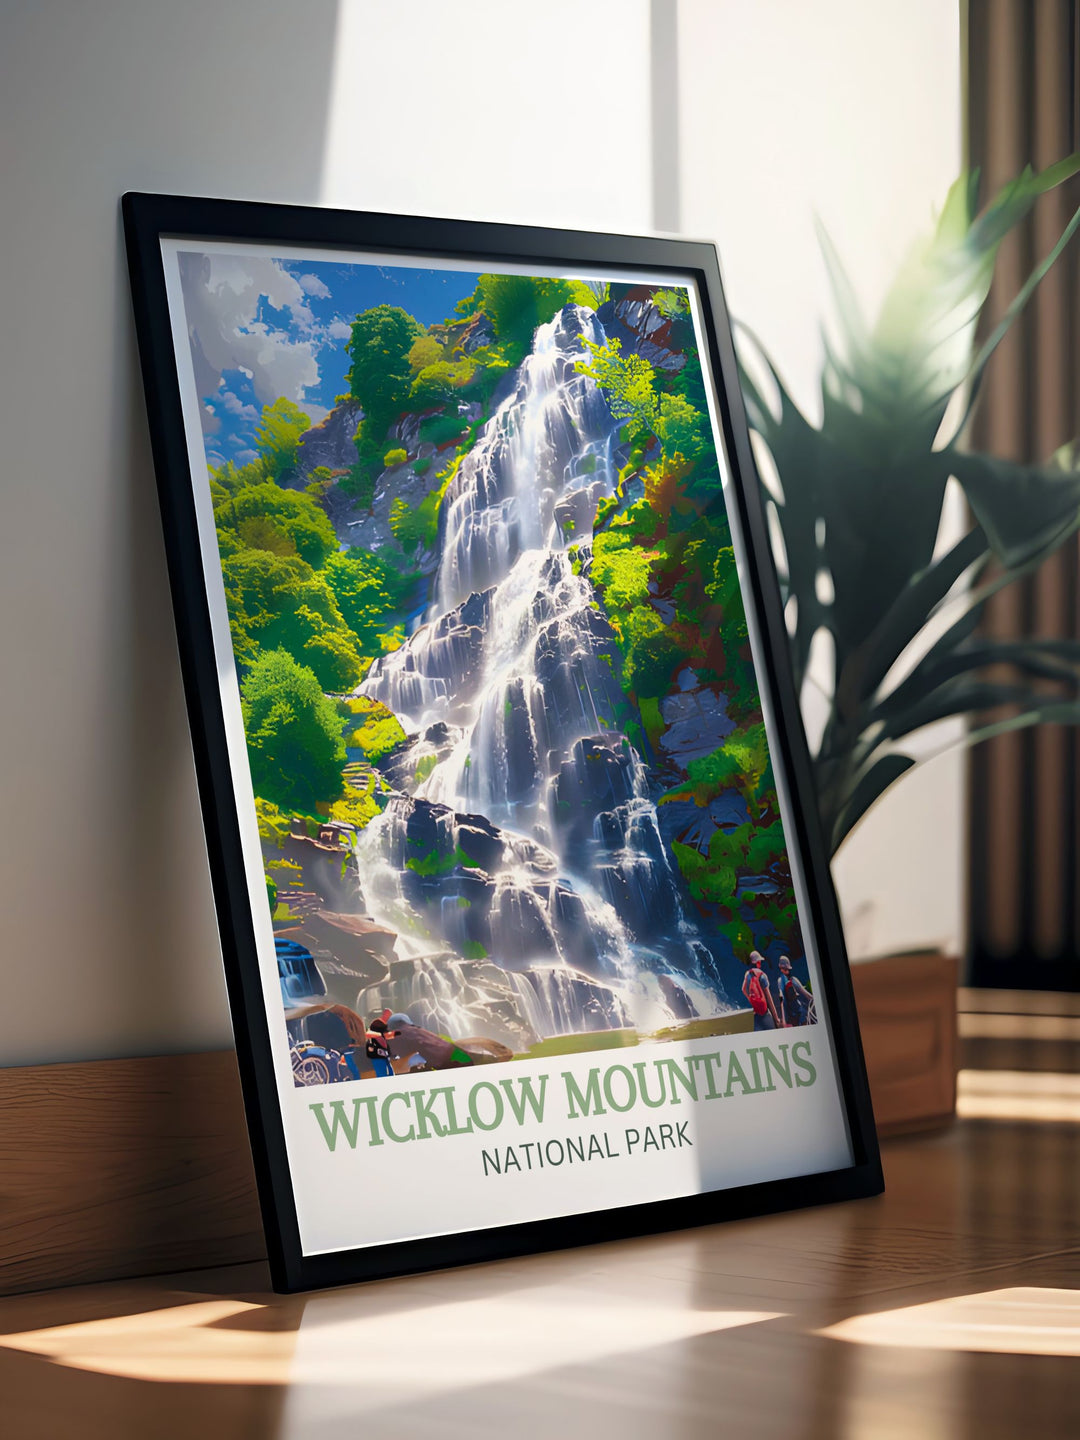 Exquisite canvas art depicting the iconic scenery of Wicklow Mountains National Park. With its rolling hills, dense forests, and tranquil lakes, this artwork brings the essence of Irelands natural beauty into your living space, ideal for nature lovers and art enthusiasts.